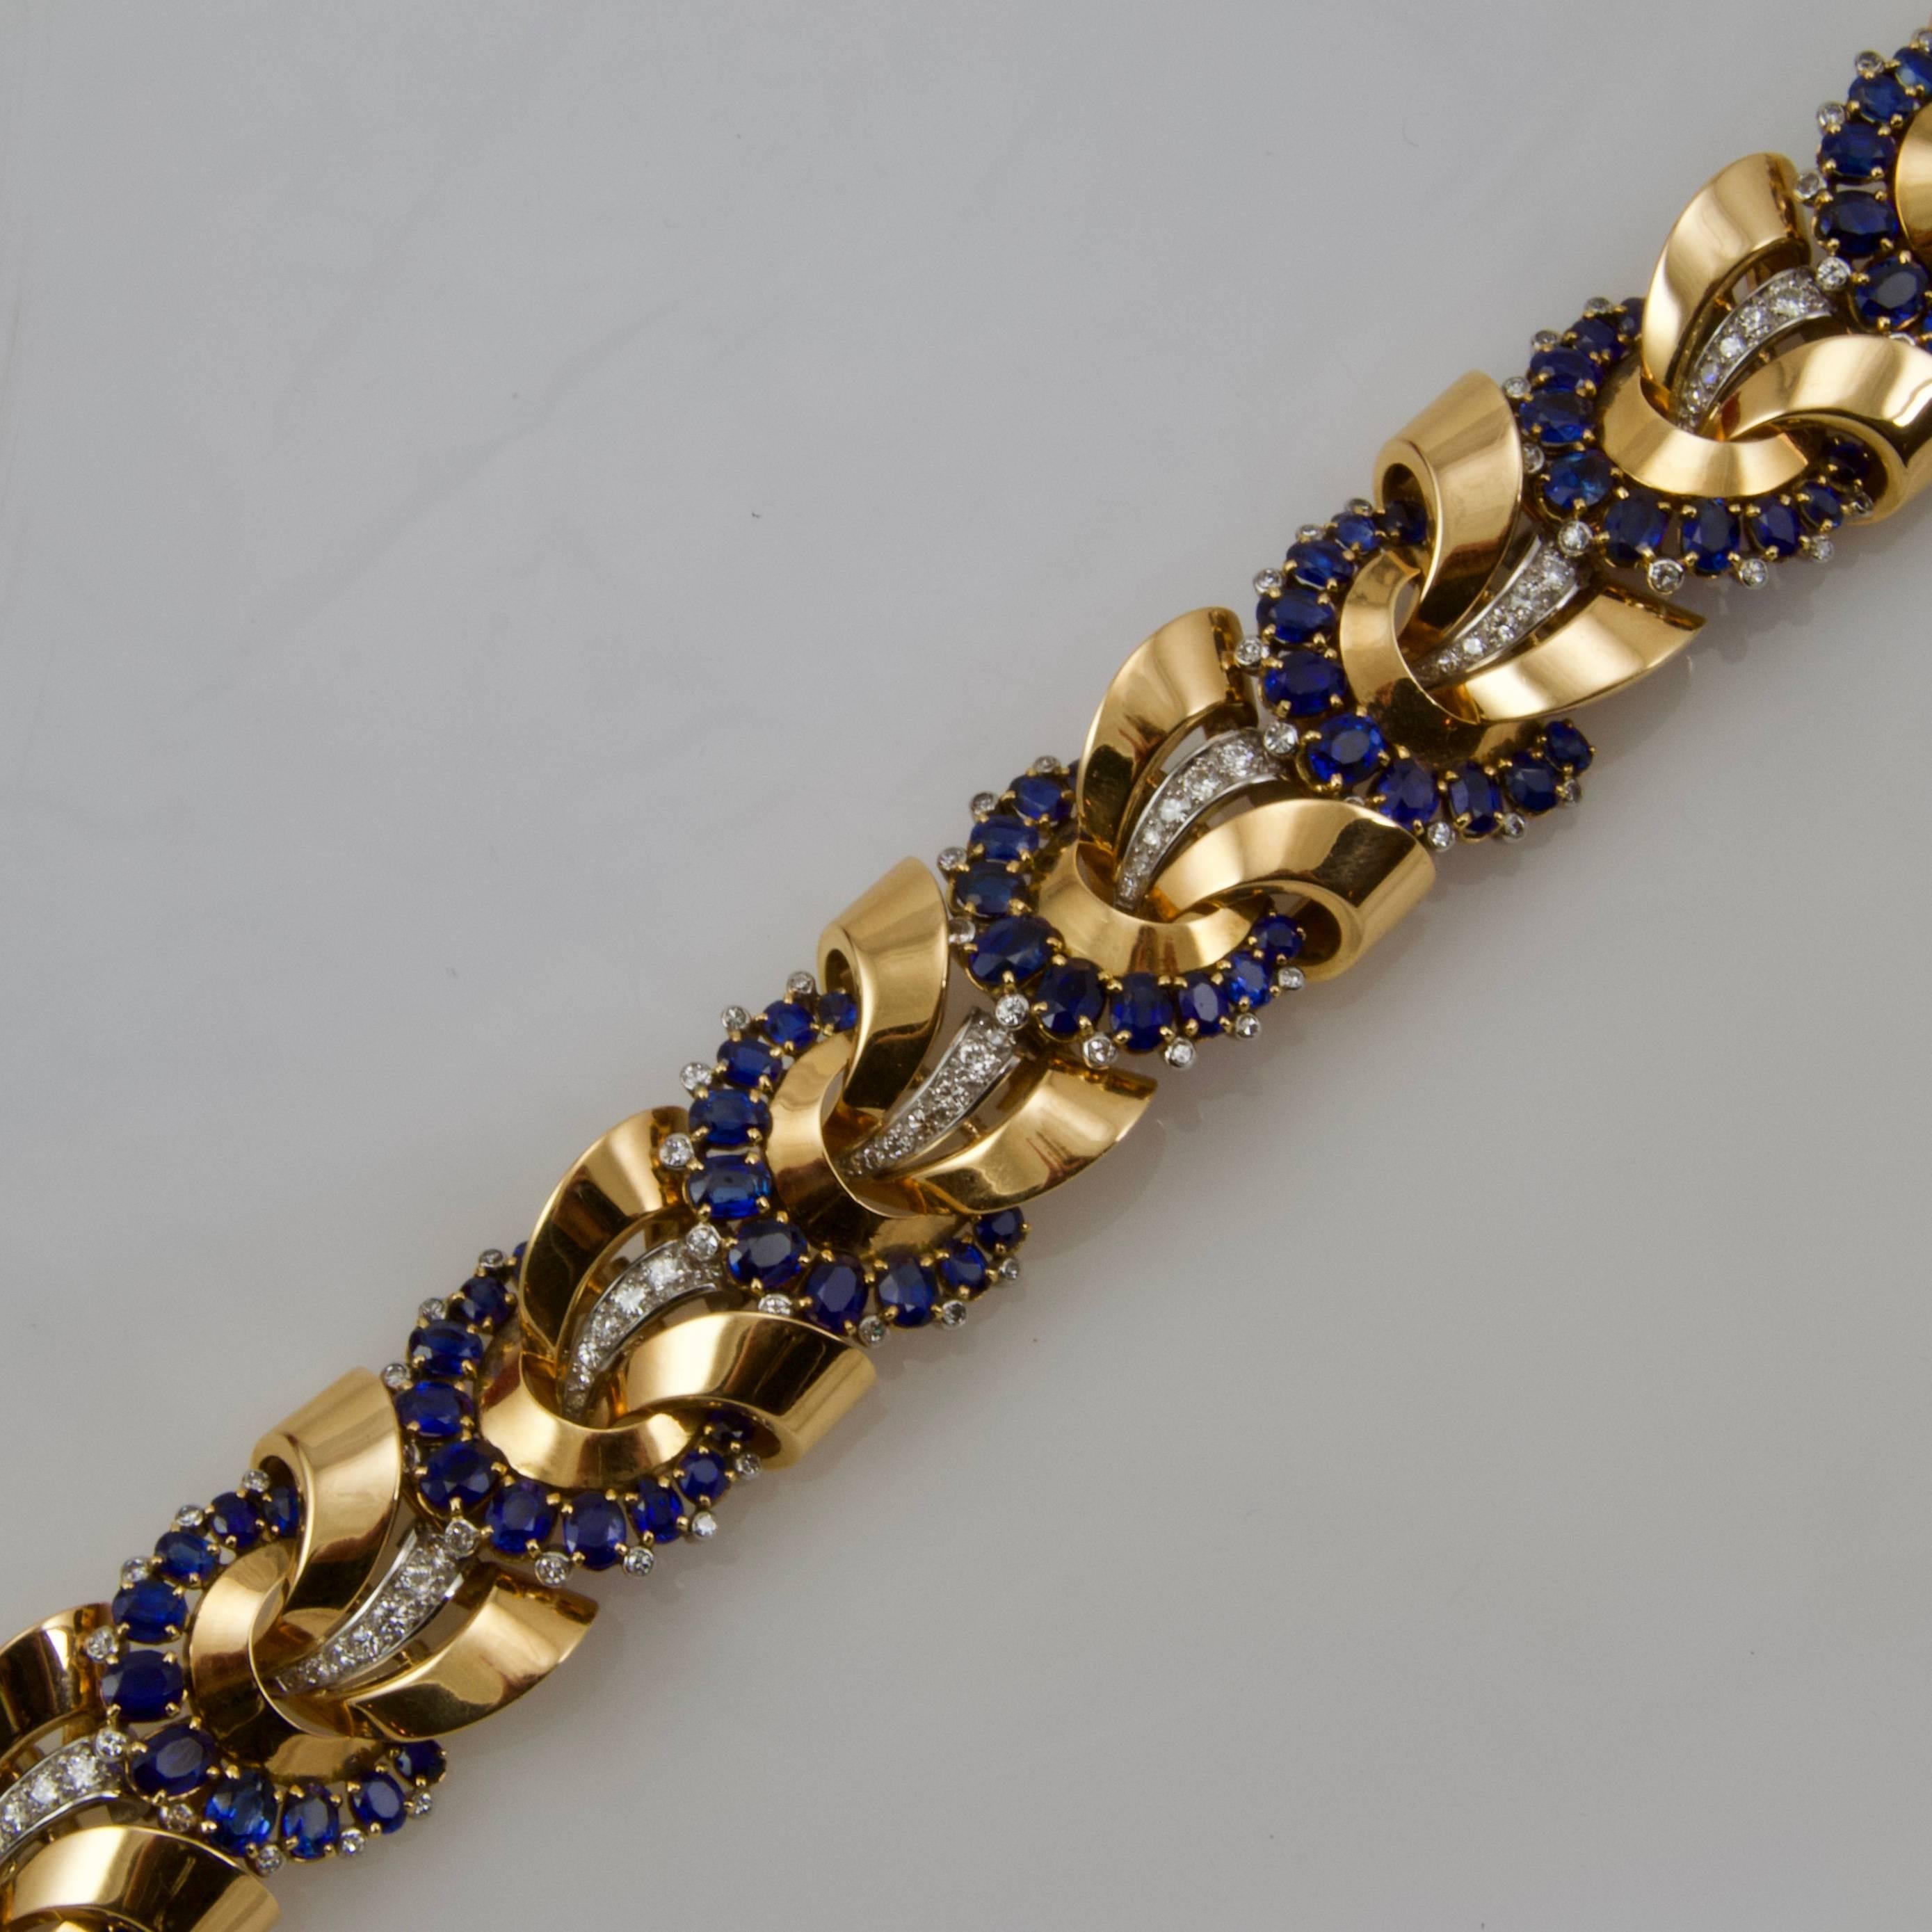 Very fair and nice quality bracelet as a yellow gold ribbon torsade set with ovale sapphires and diamonds. Diamonds set on platinum.
French assays marks for 18kt gold and platinum.
Maker's mark of René Sublon. Maker for Bulgari.
France circa 1950.